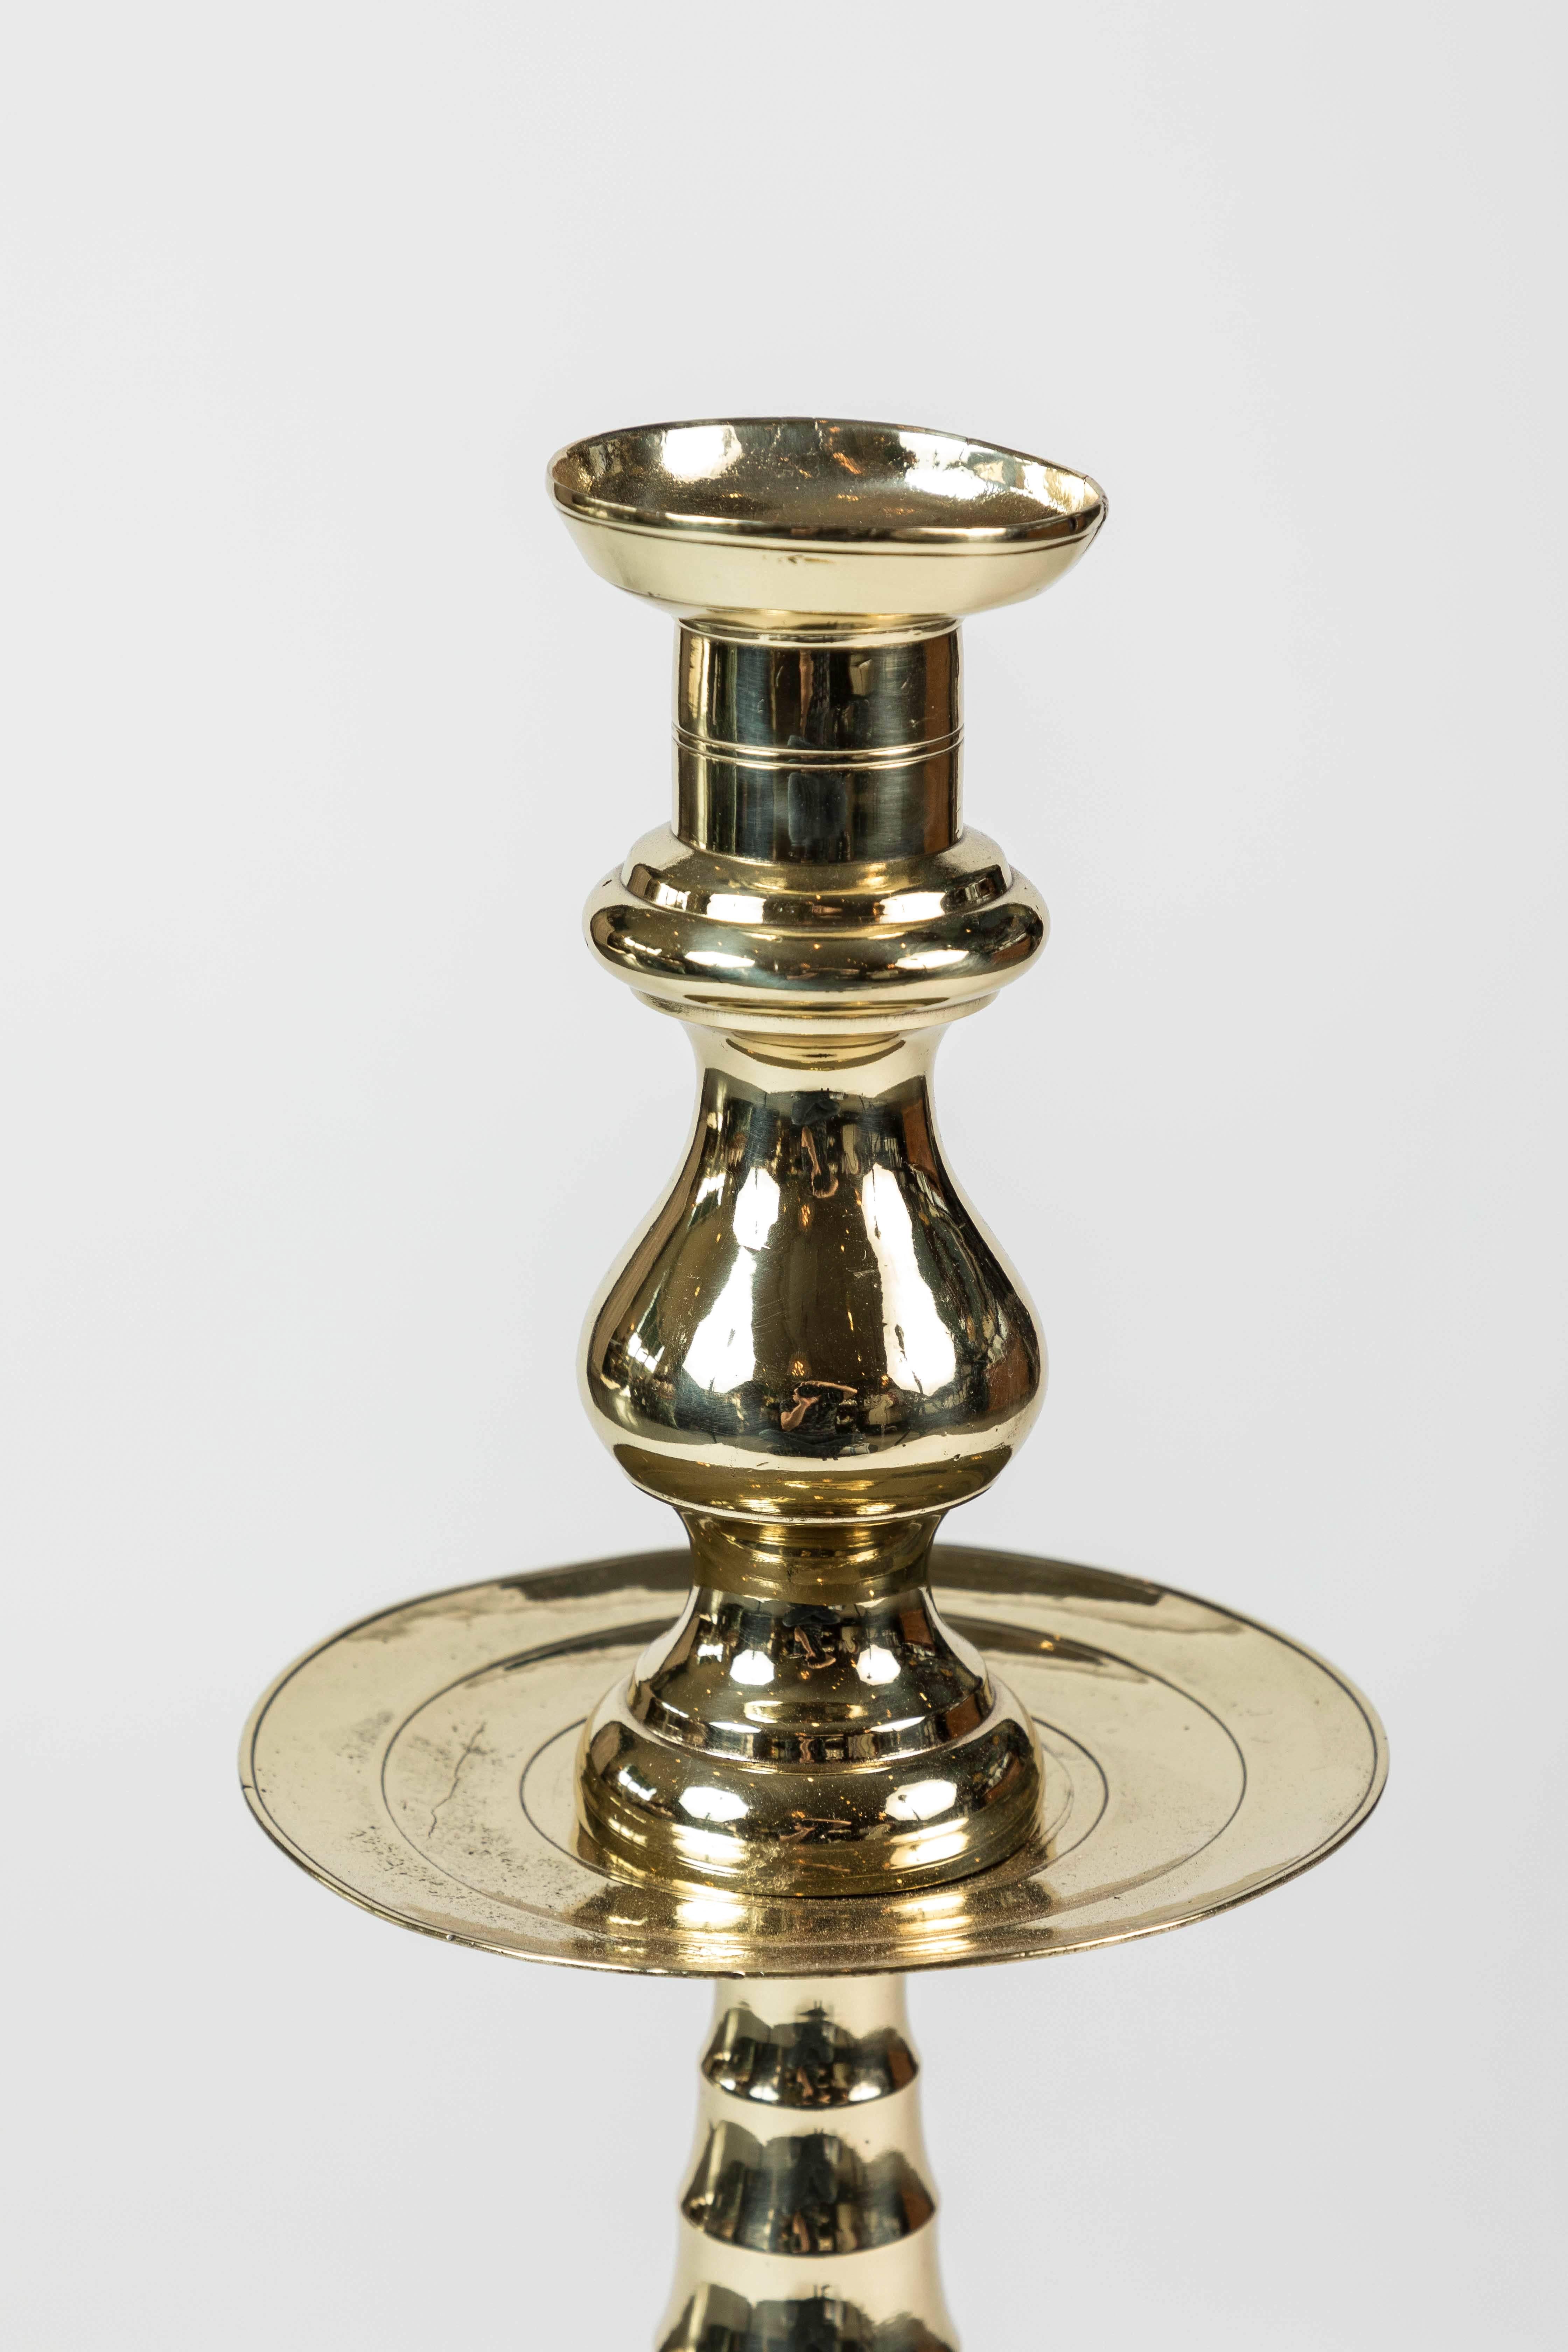 Large newly polished brass candleholder with beehive pattern stem and base, and simple wax catcher detail, circa 1850-1900.